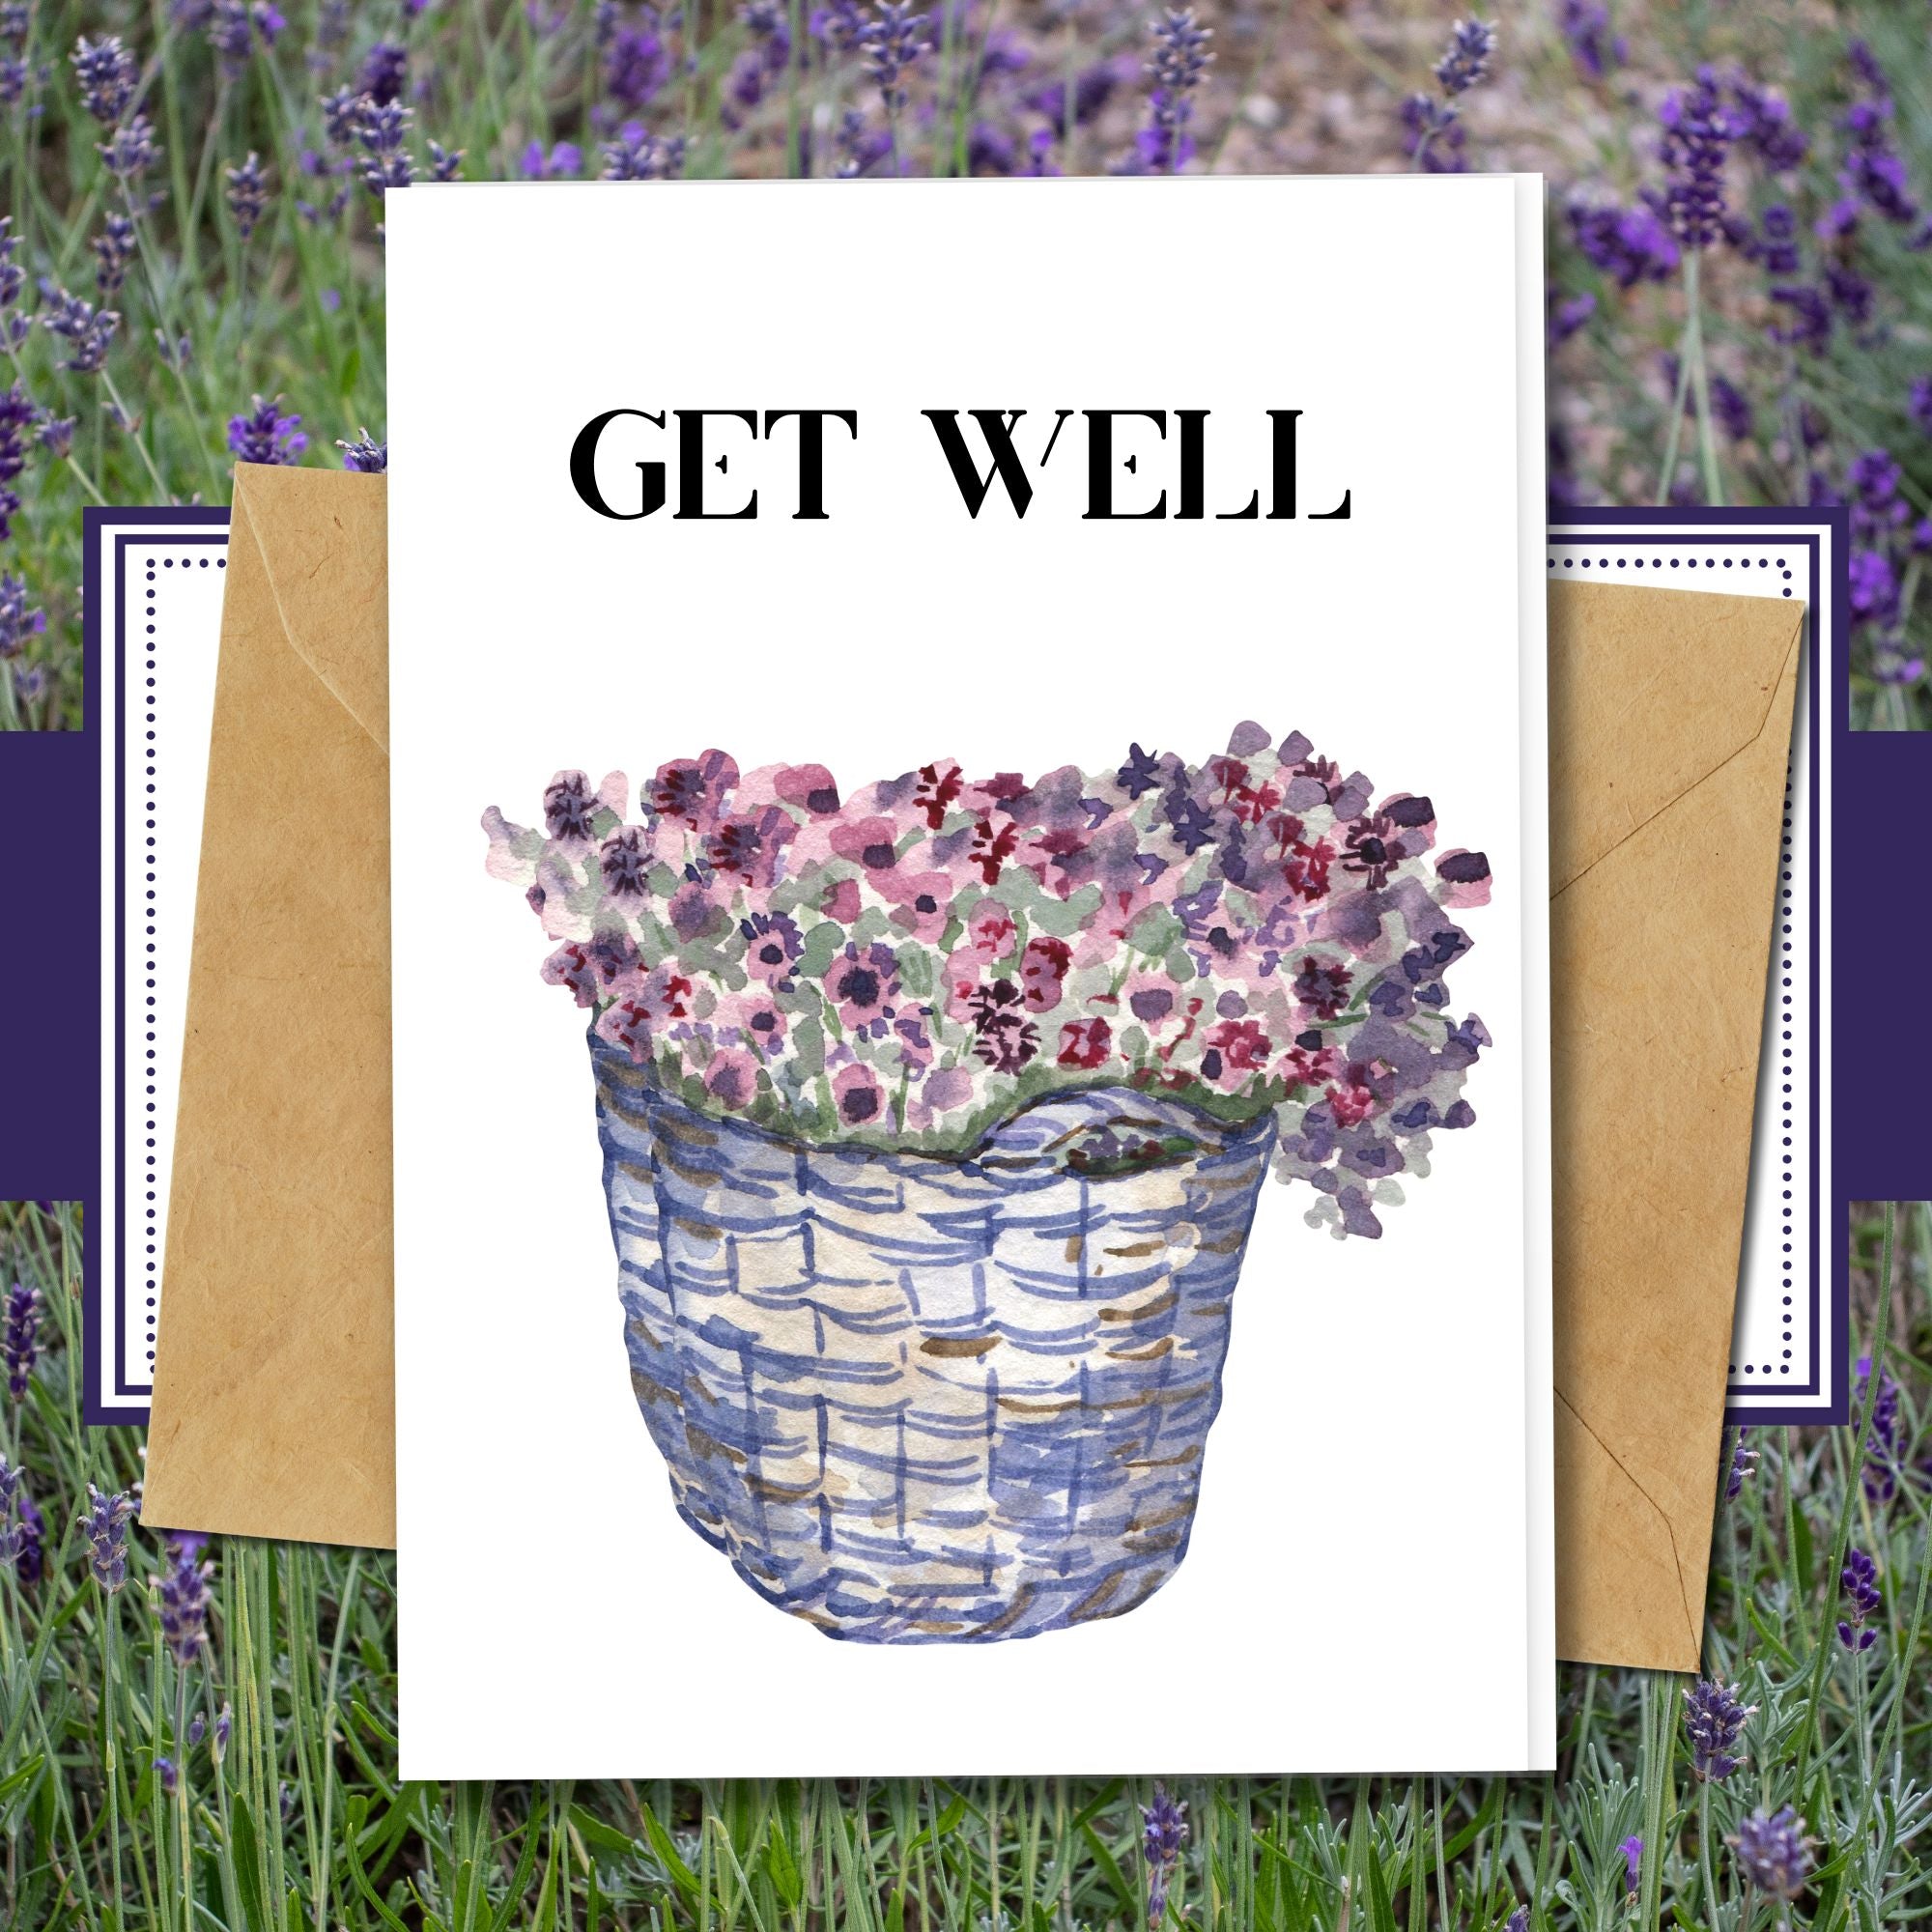 handmade get well card with a flower and blue basket design